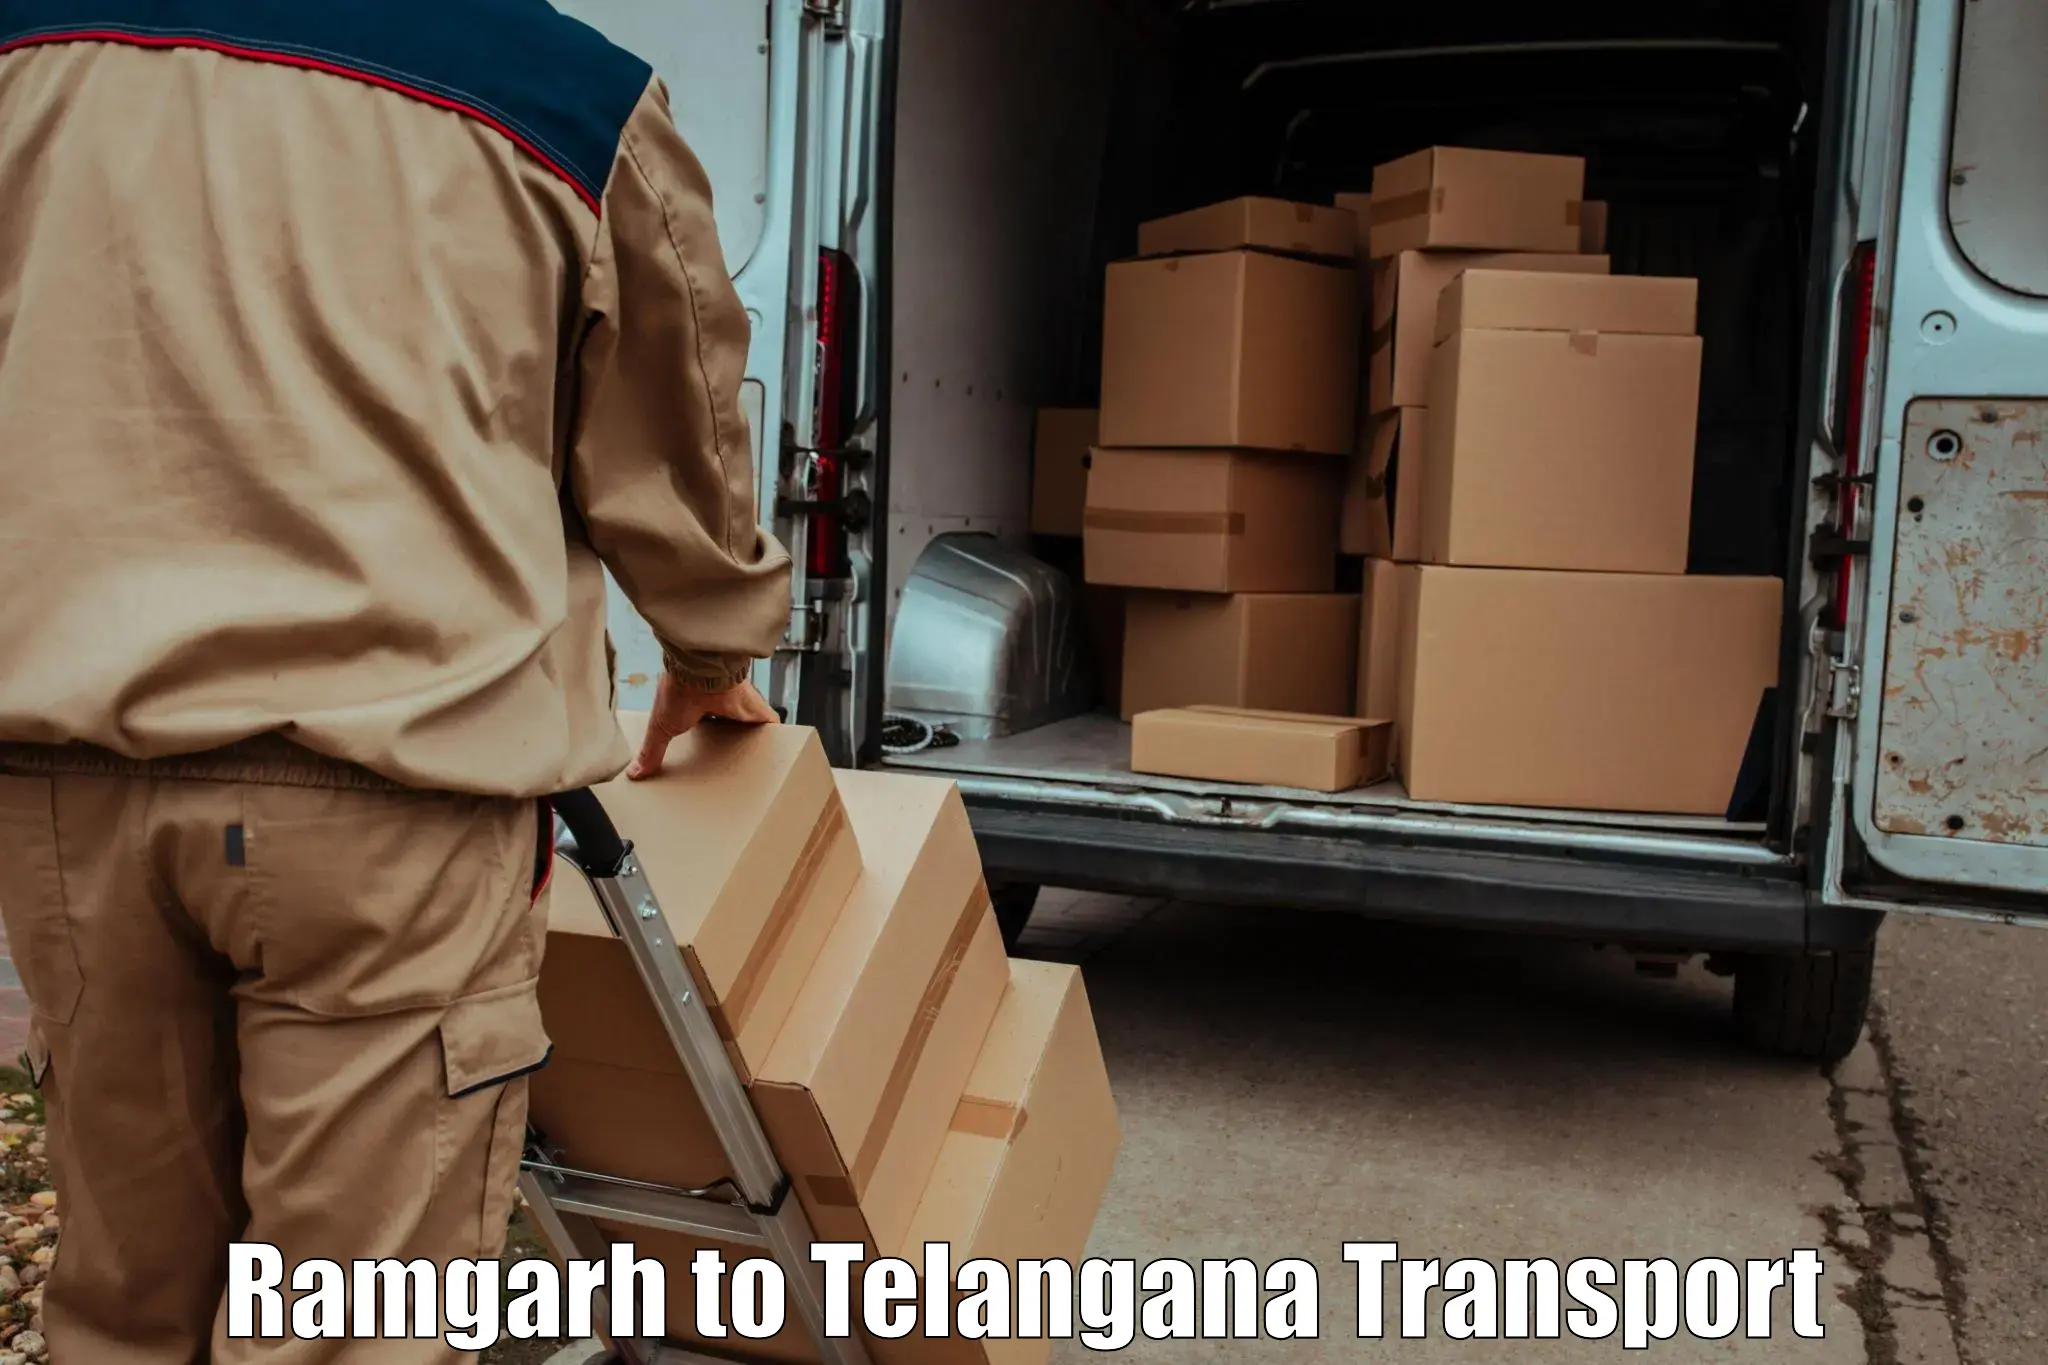 Air cargo transport services Ramgarh to Secunderabad